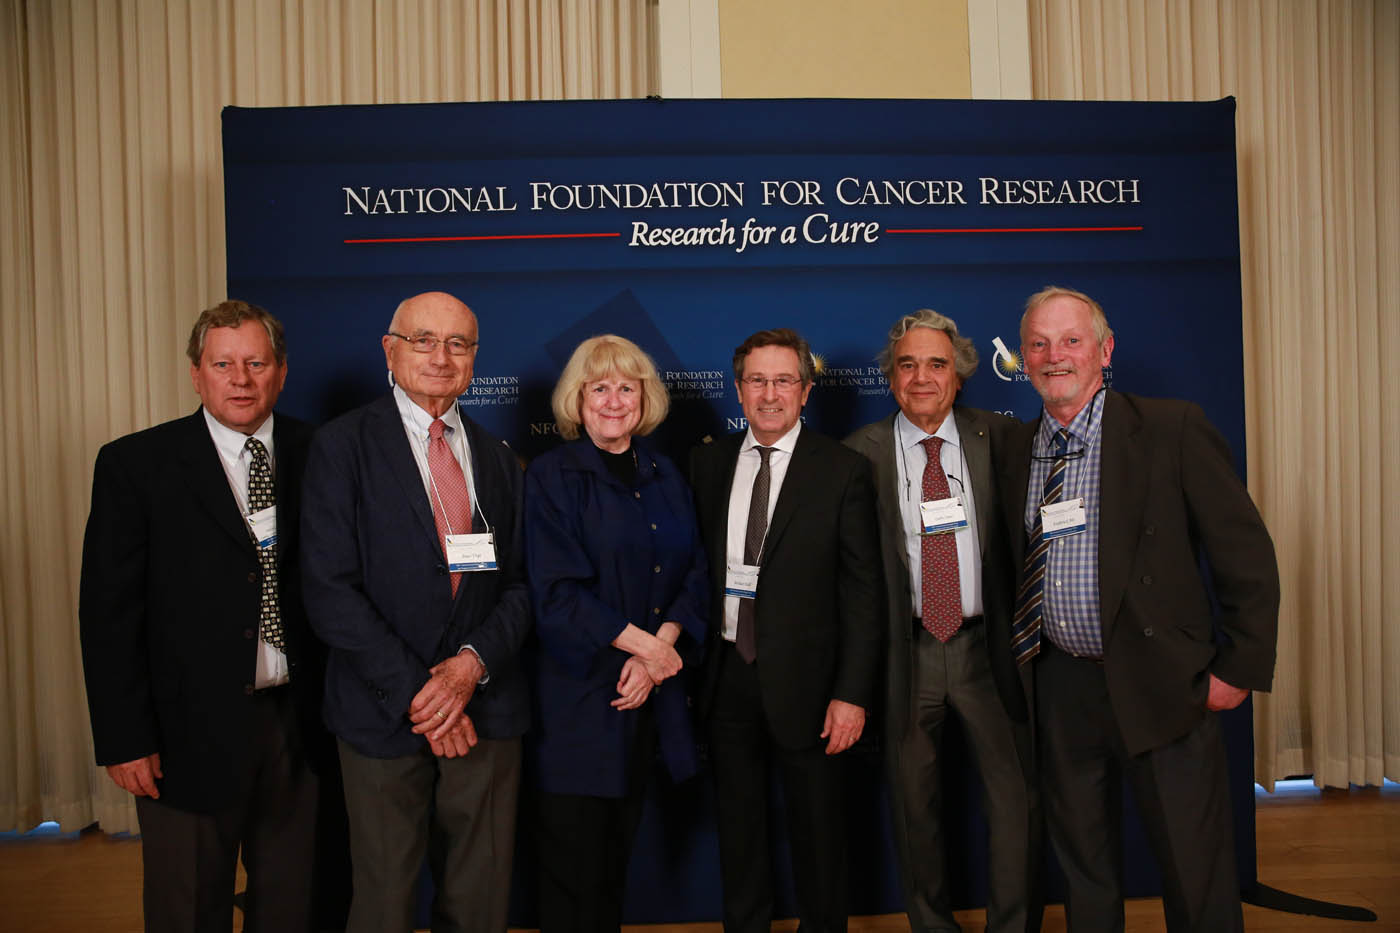 Past Szent Gyorgyi Prize winners (L to R) Web Cavenee, Peter Vogt, Mary-Claire King, Carlo Croce, & Frederick Alt with this year’s winner, Michael Hall